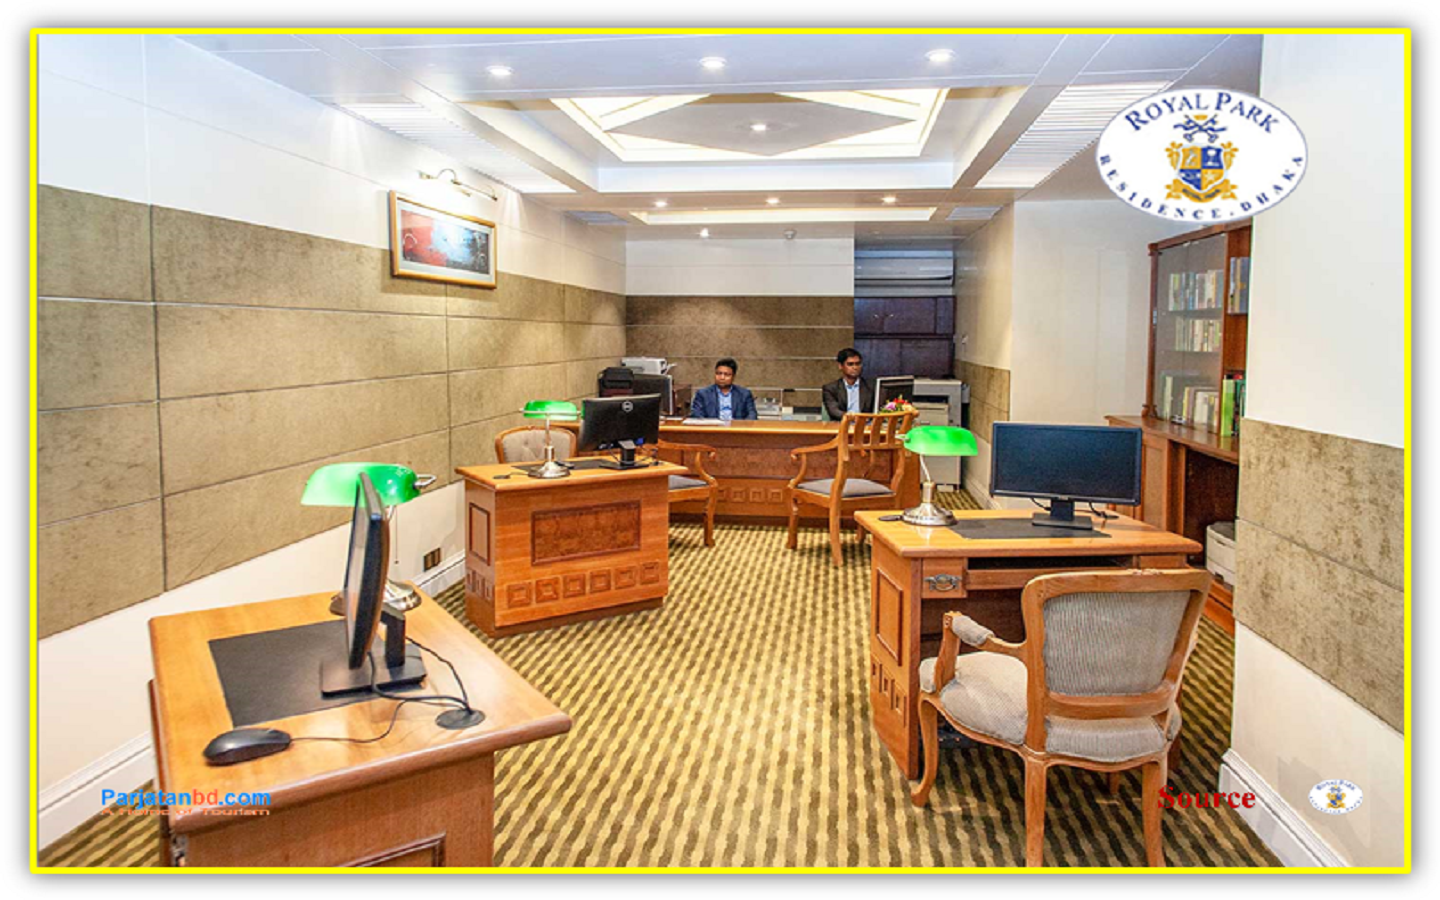 Royal Park Residence Hotel, Banani Picture-2